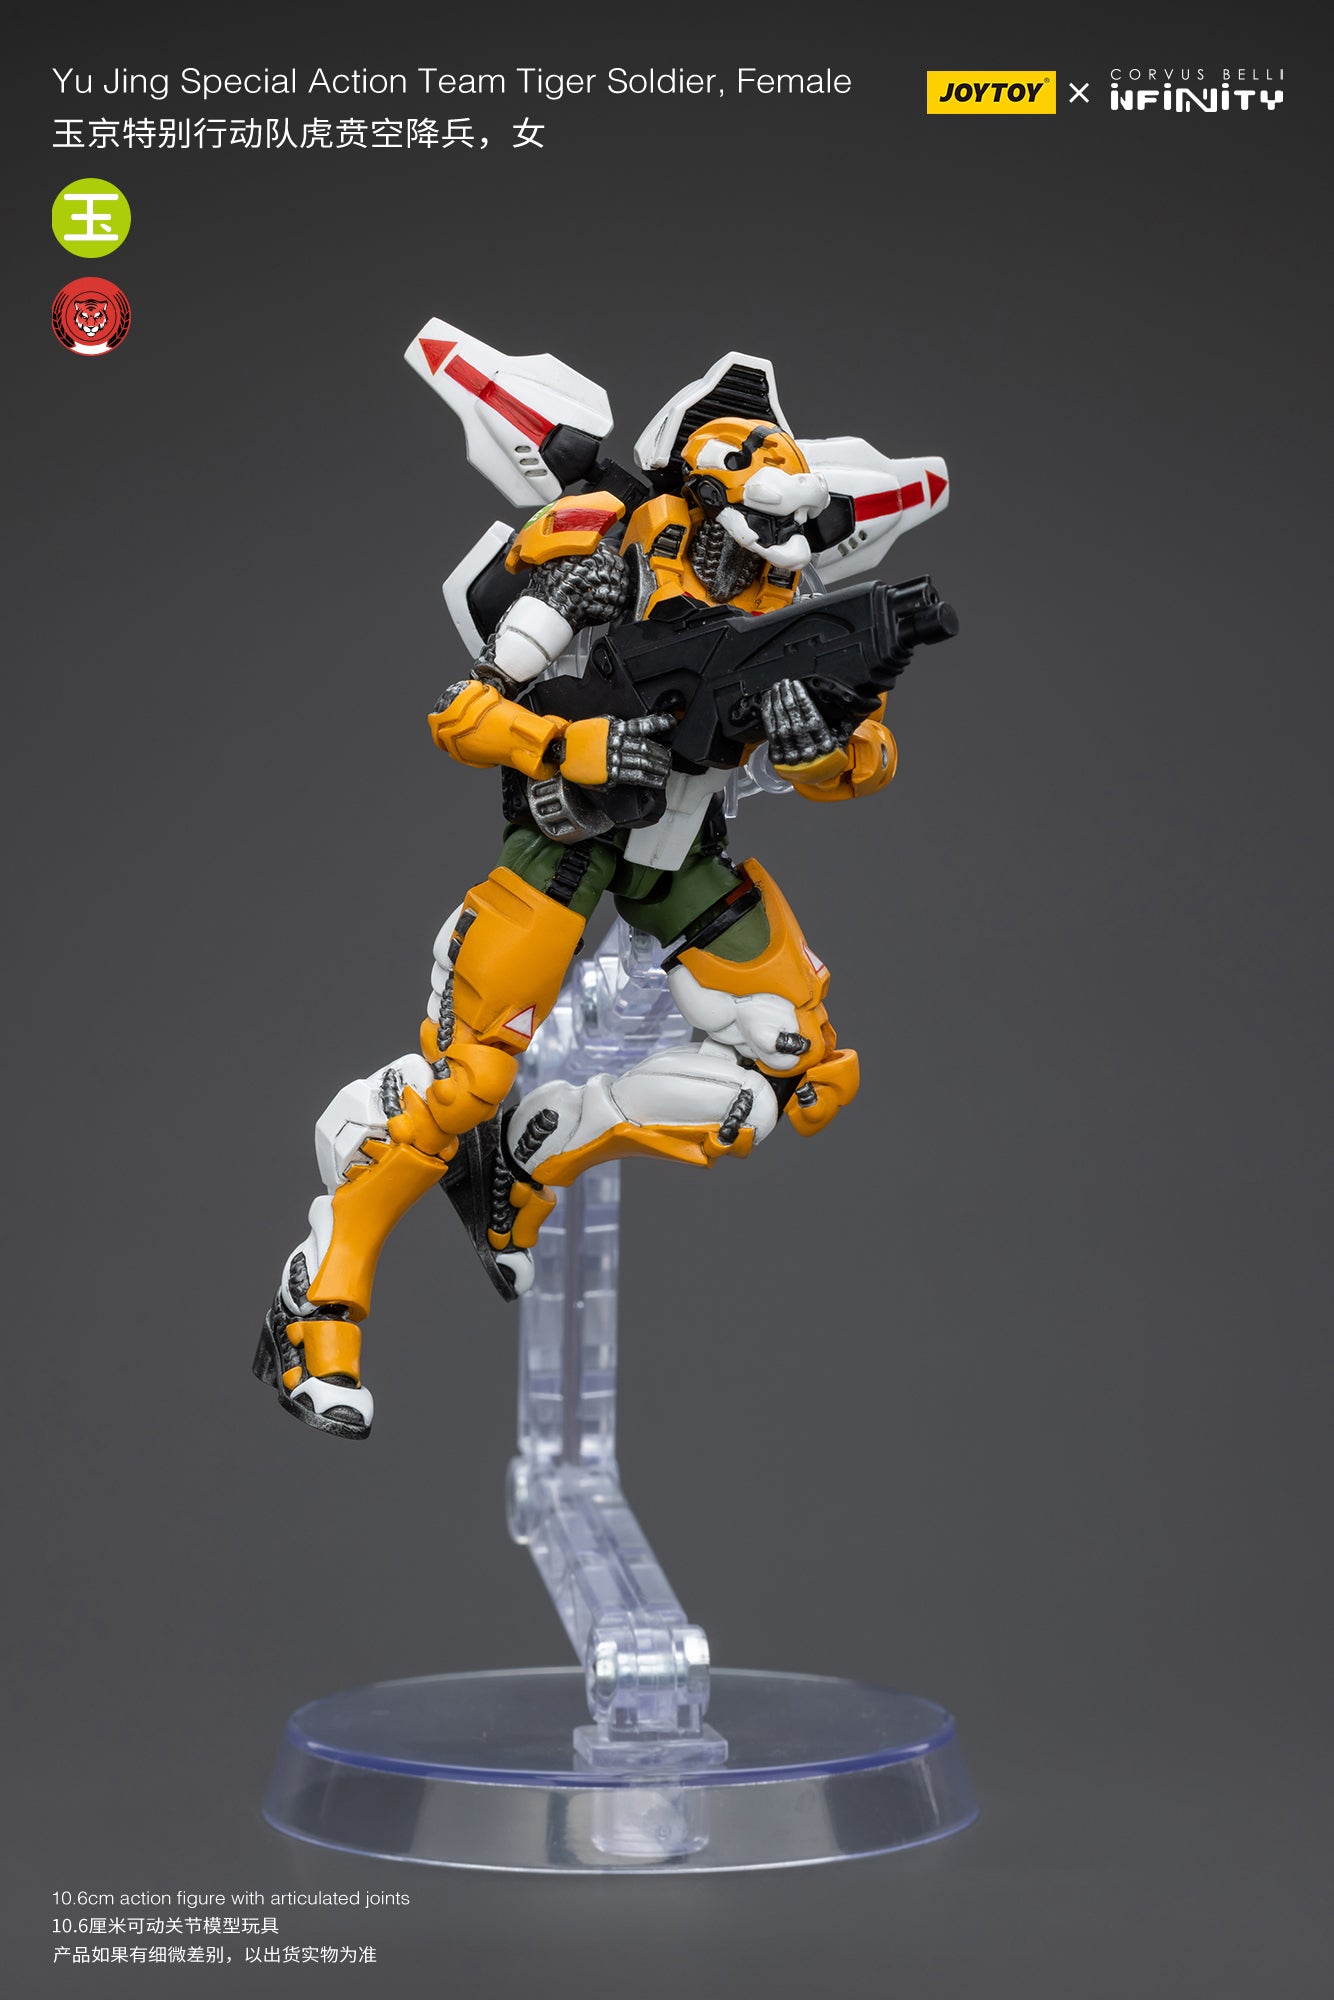 Yu Jing Special Action Team Tiger Soldier, Female - Infinity Action Figure By JOYTOY